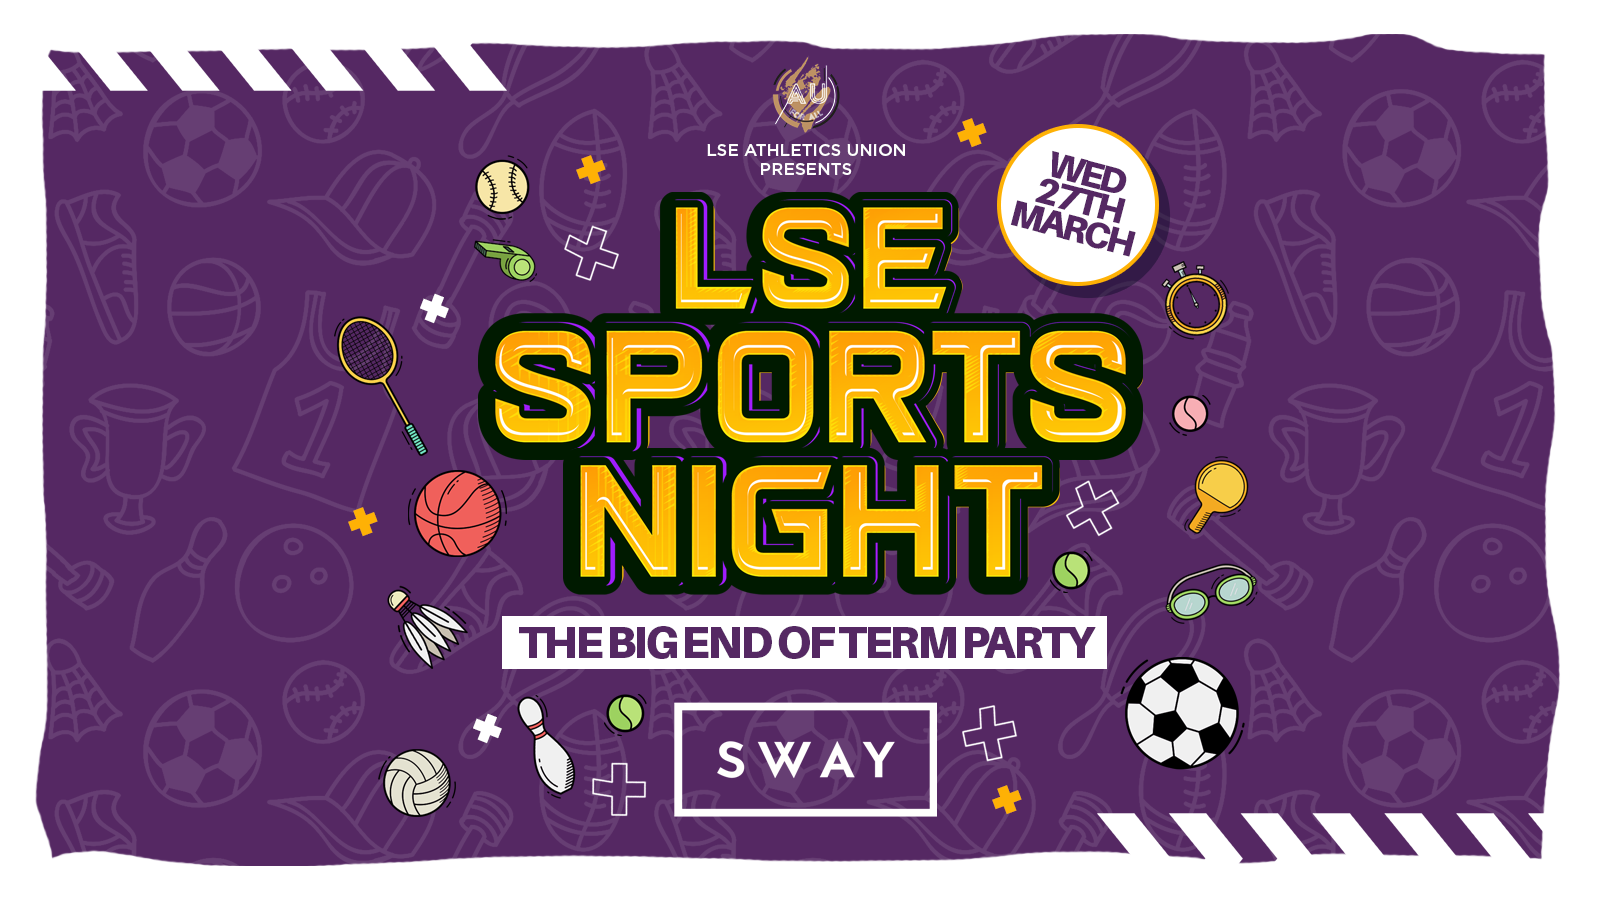 LSE AU Presents 💃 The Official LSE Sports Night – END OF TERM SPECIAL at SWAY London  ❤️